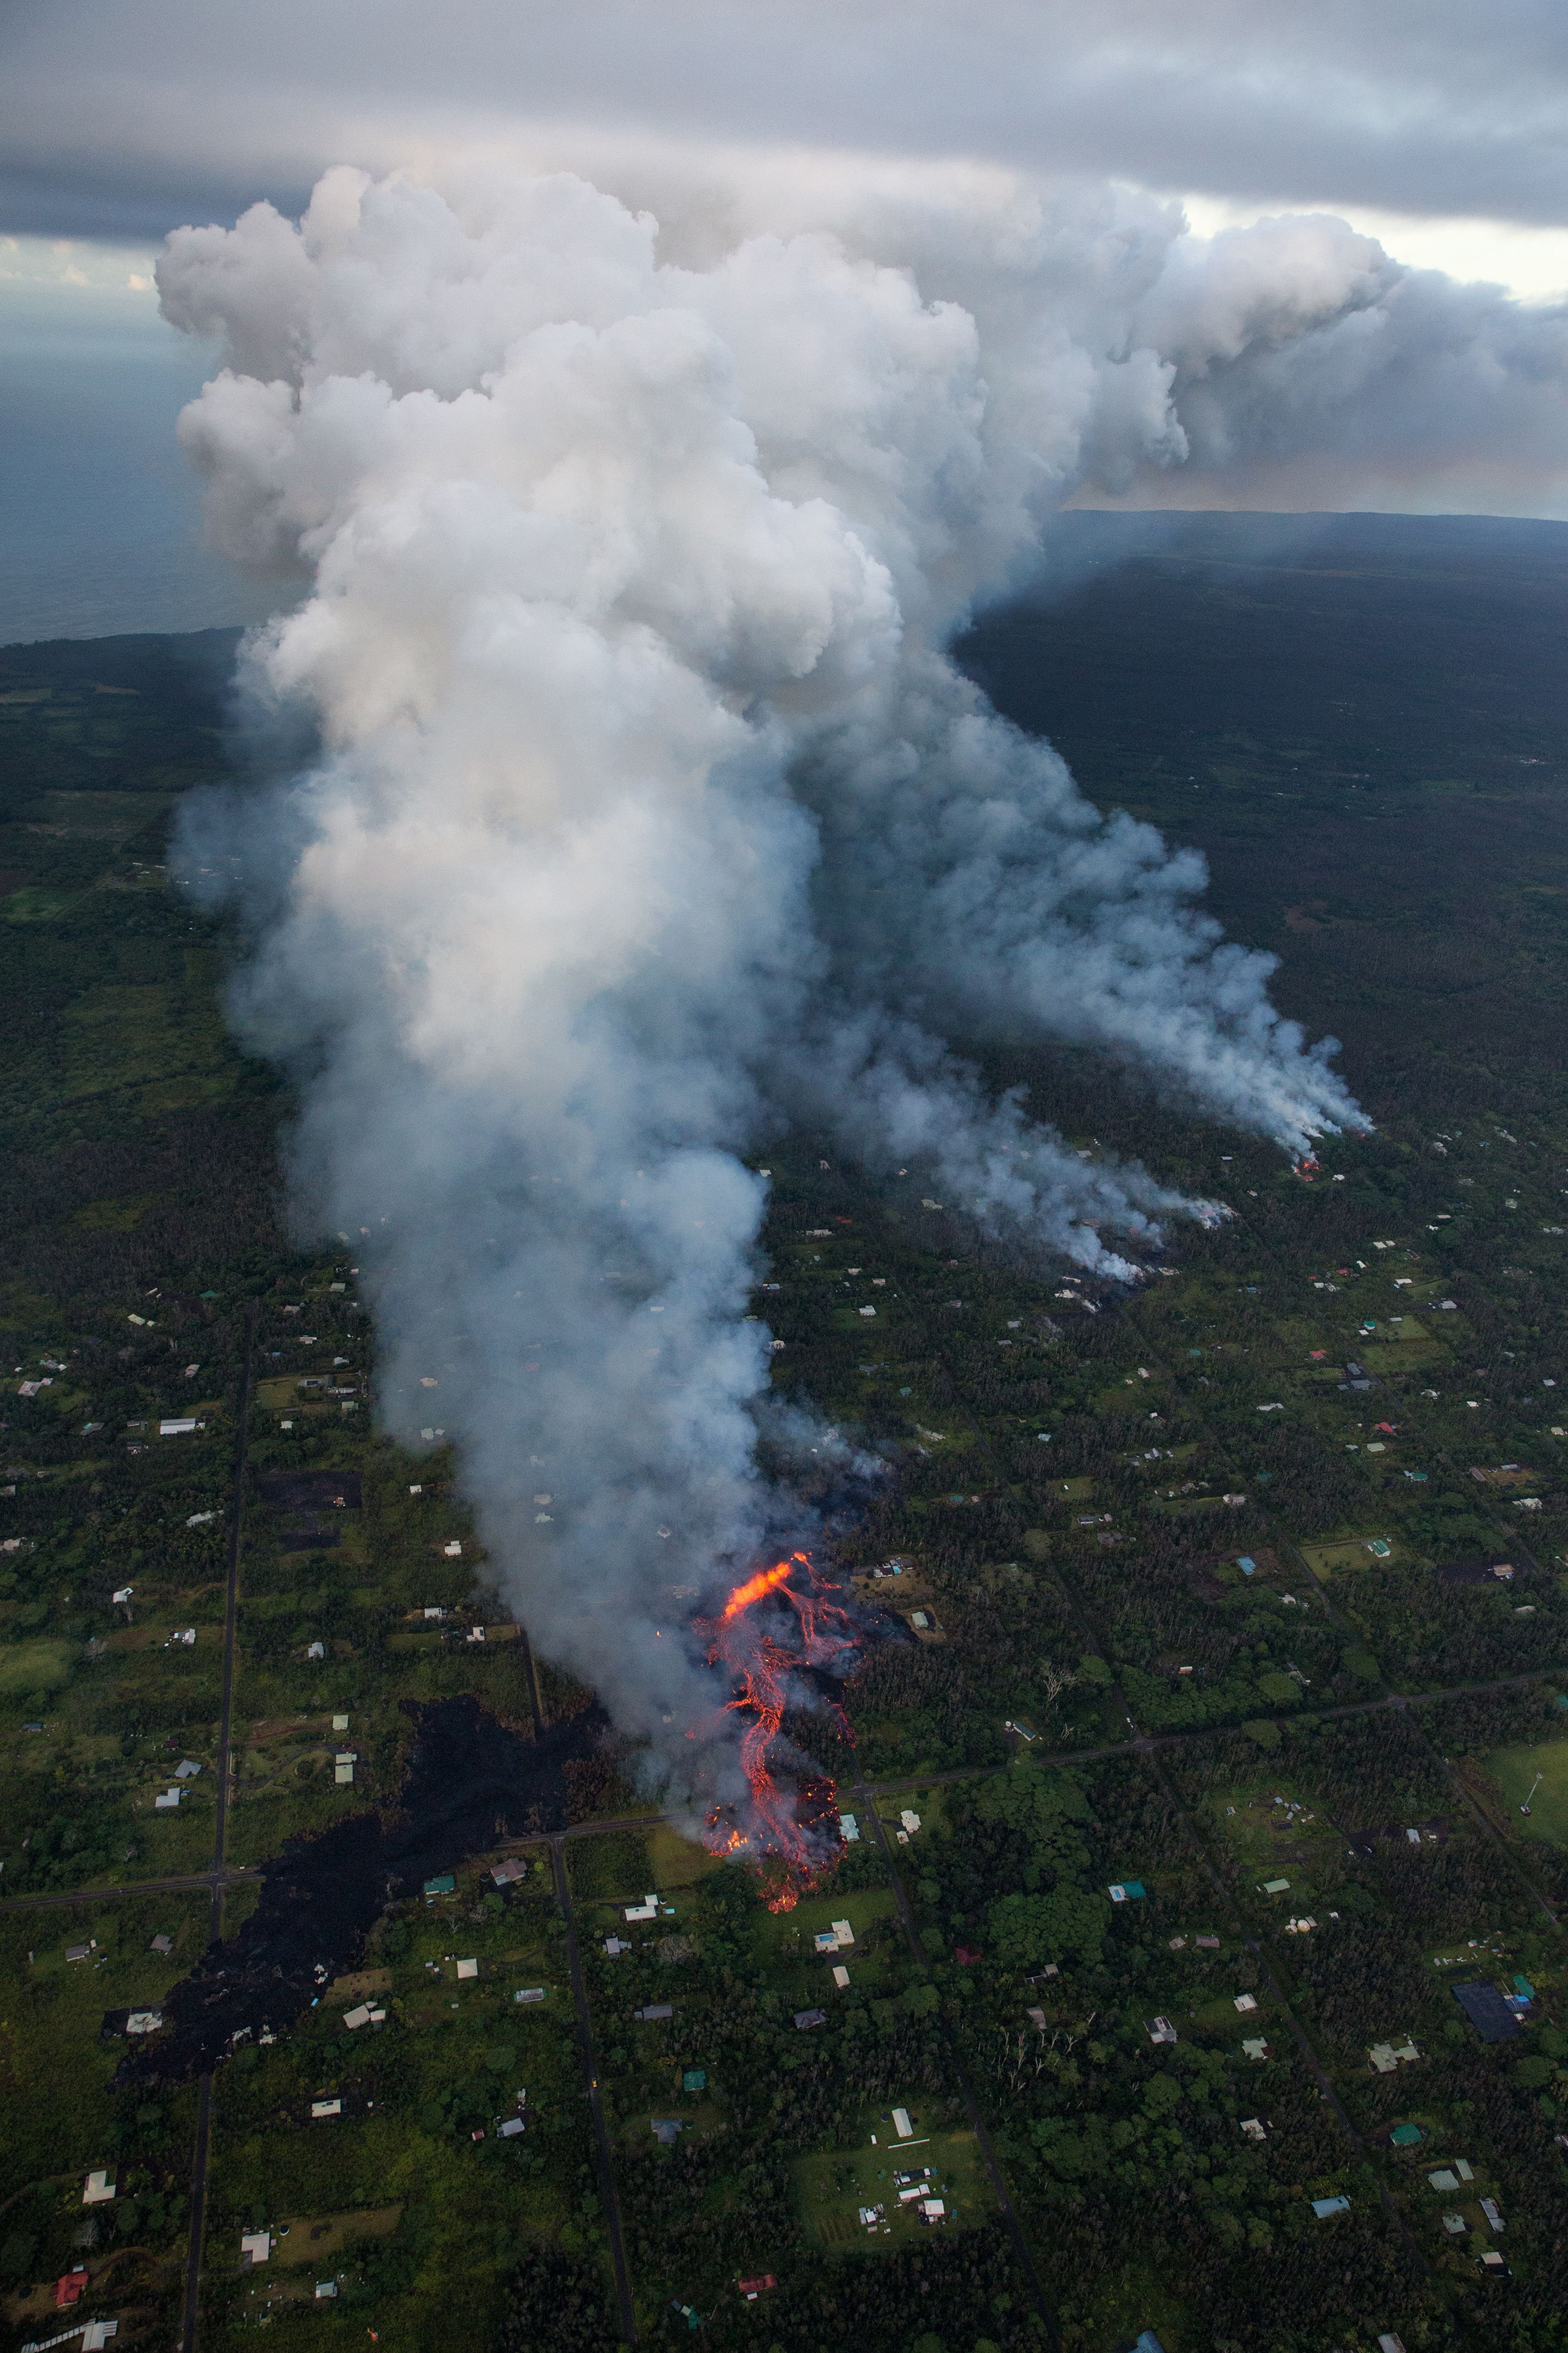 Omori says the helicopter flew at 4,000 feet above ground level. (Bruce Omori—Paradise Helicopters/EPA-EFE/Shutterstock)